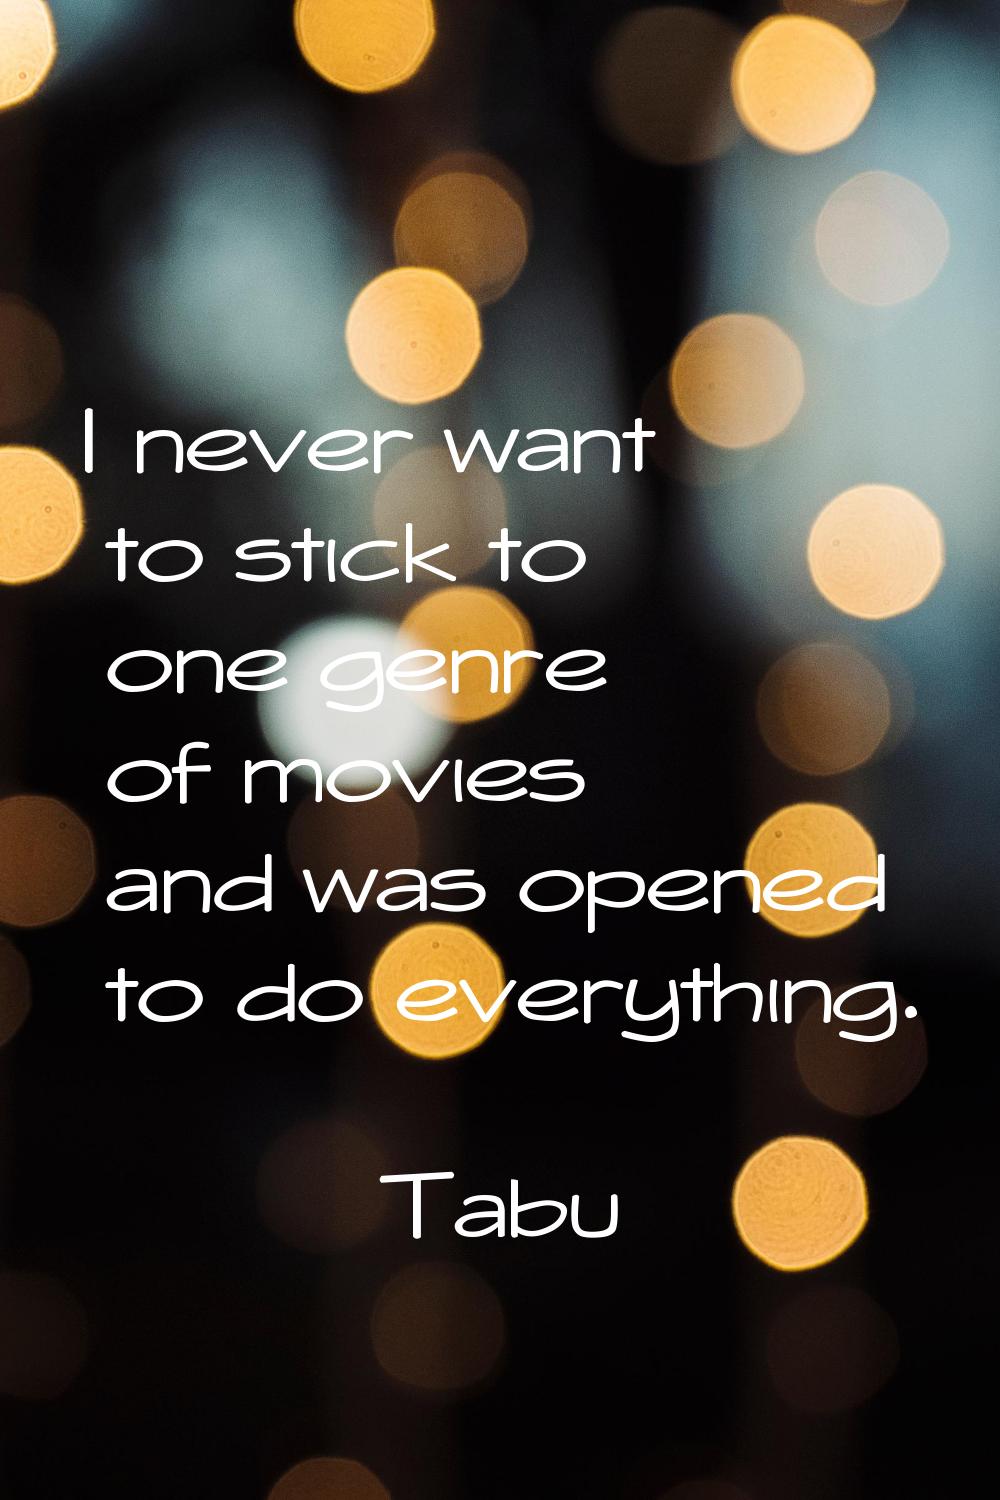 I never want to stick to one genre of movies and was opened to do everything.